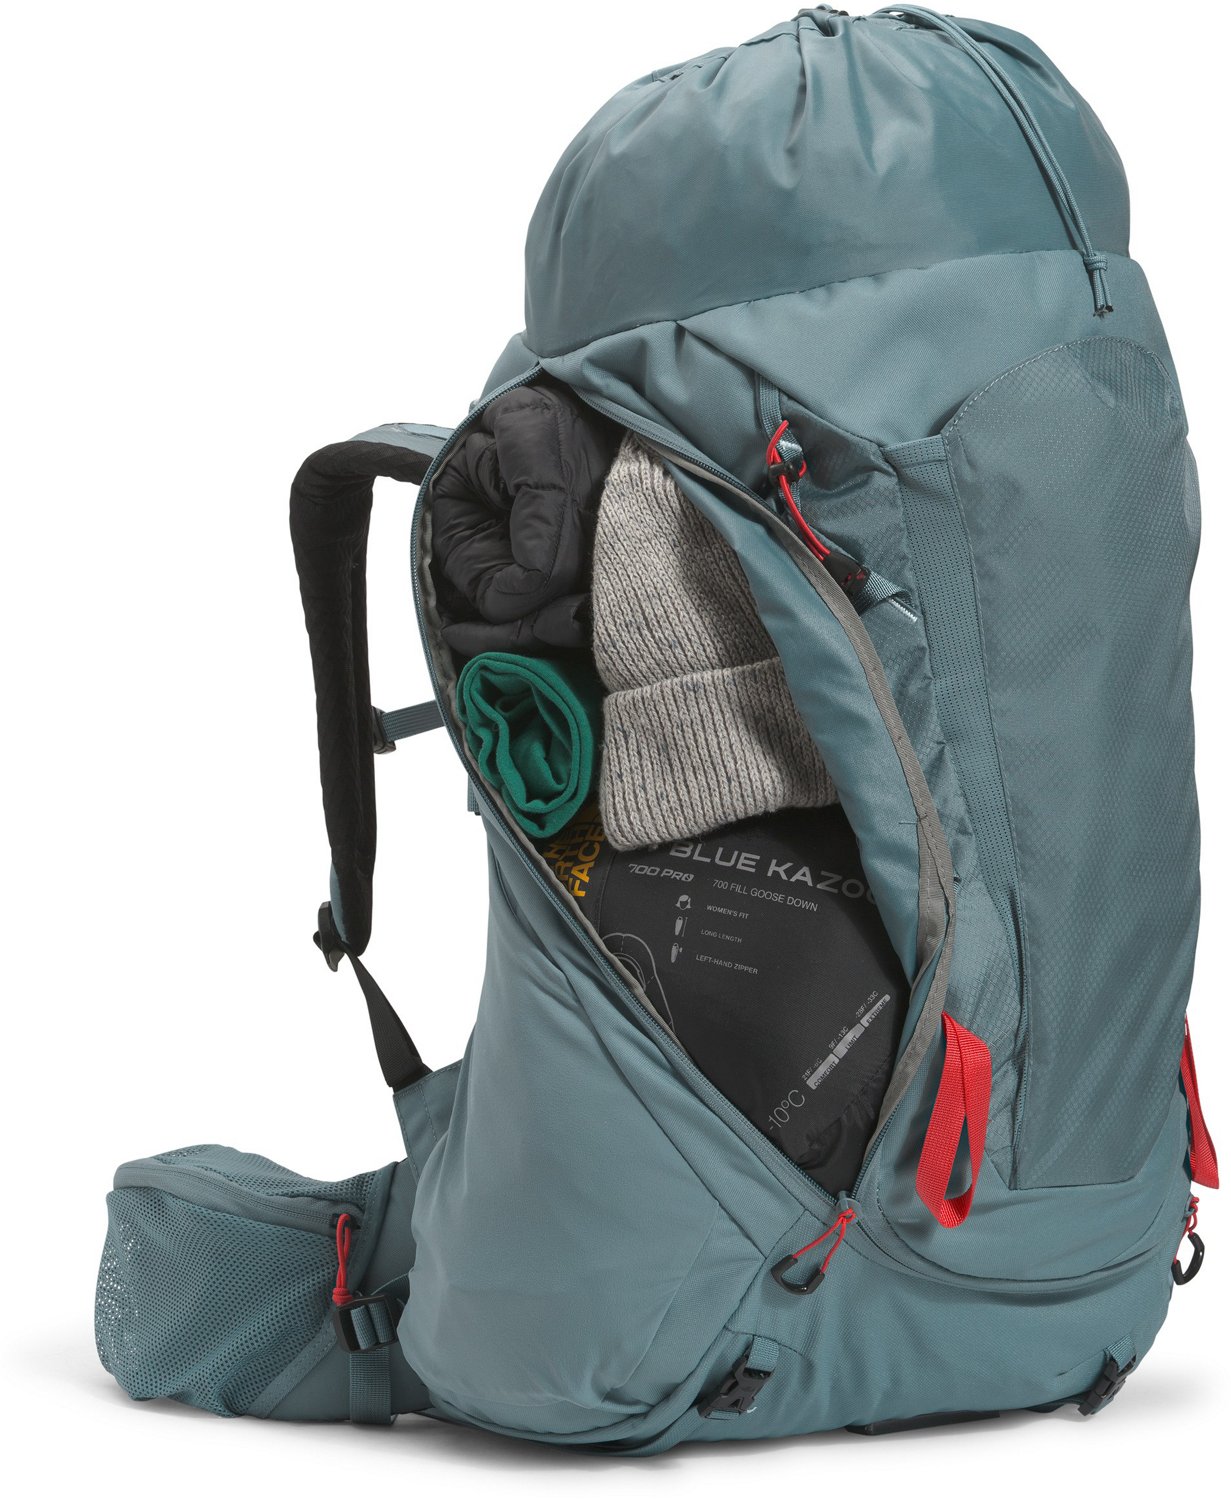 The North Face Women's Terra 55 Backpack                                                                                         - view number 4